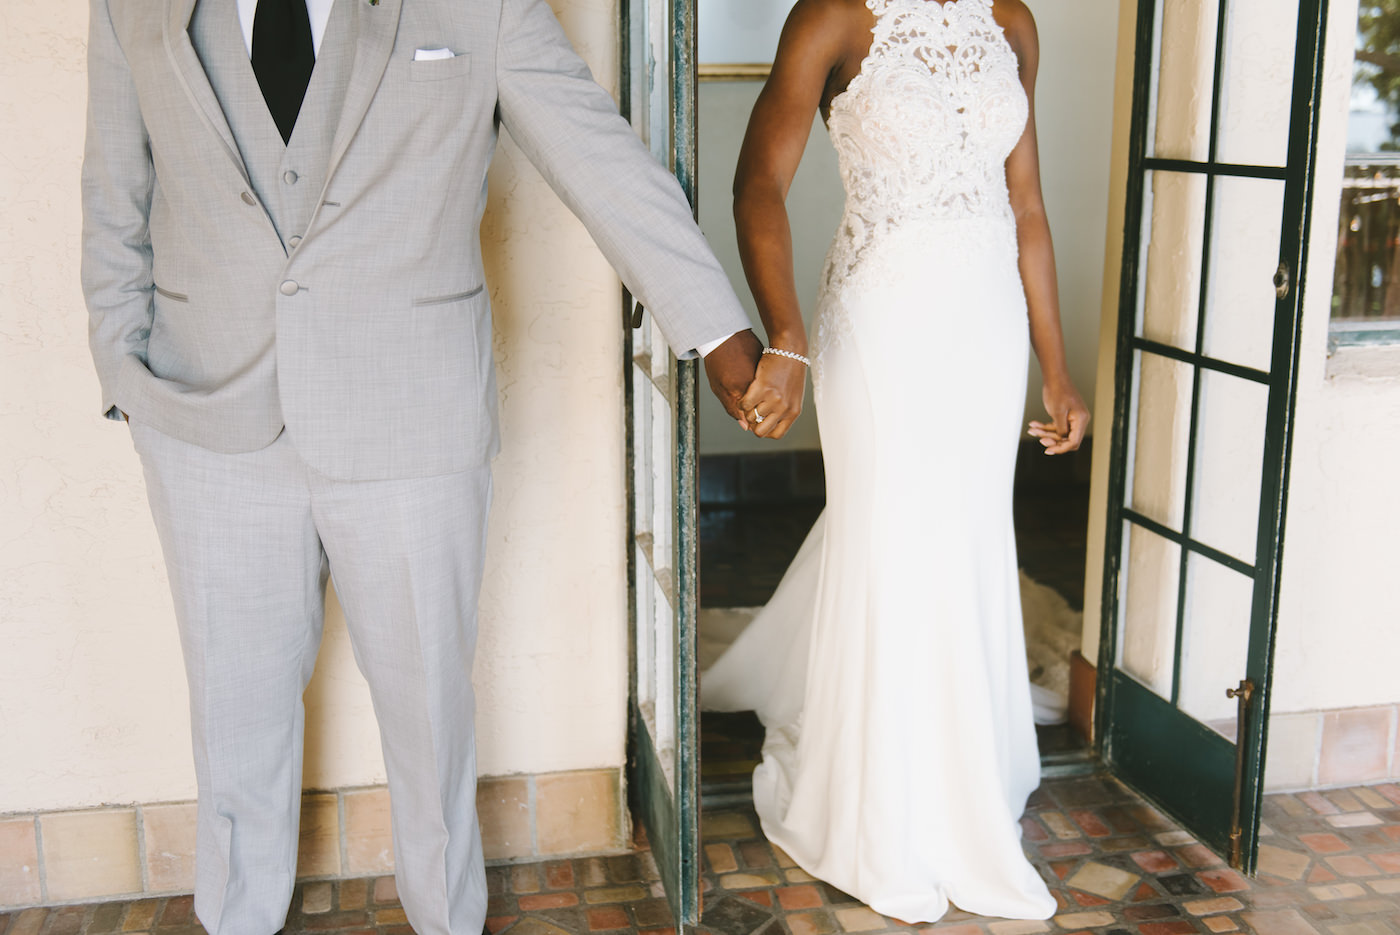 Sarasota Bride and Groom, Holding Hands Behind the Door Before Wedding Ceremony, Bride Wearing Fitted White Lace Dress | Florida Wedding Photographer Kera Photography | First Touch Wedding Portrait